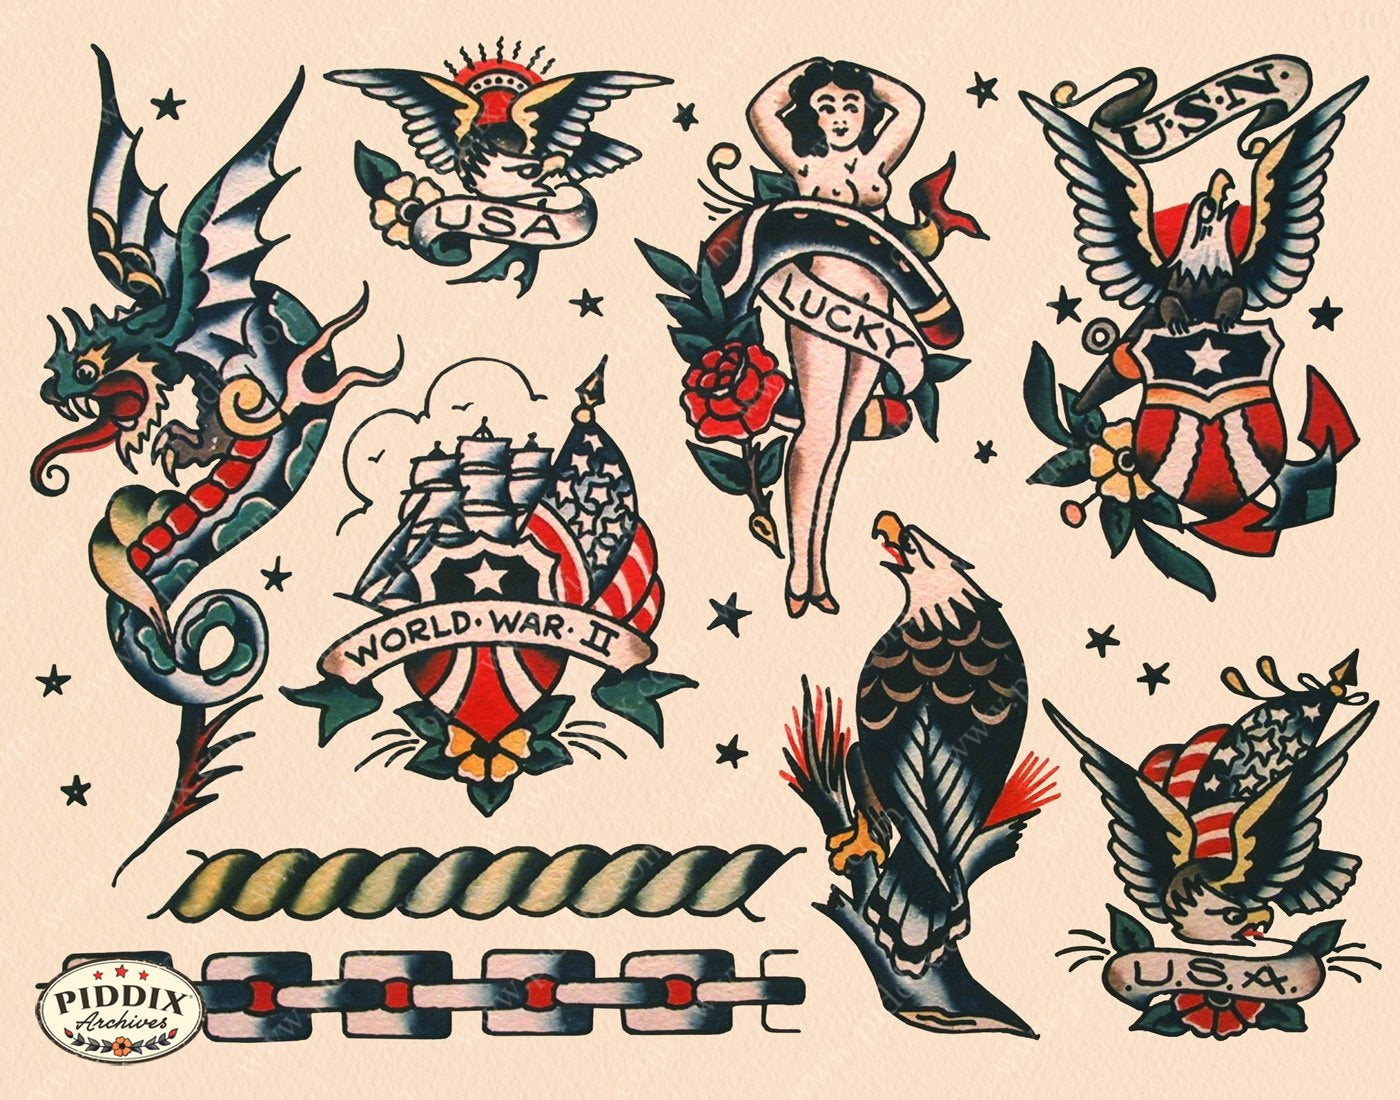 Buy Sailor Jerry Tattoo Art Flash 13x19 Photo Print Online in India - Etsy